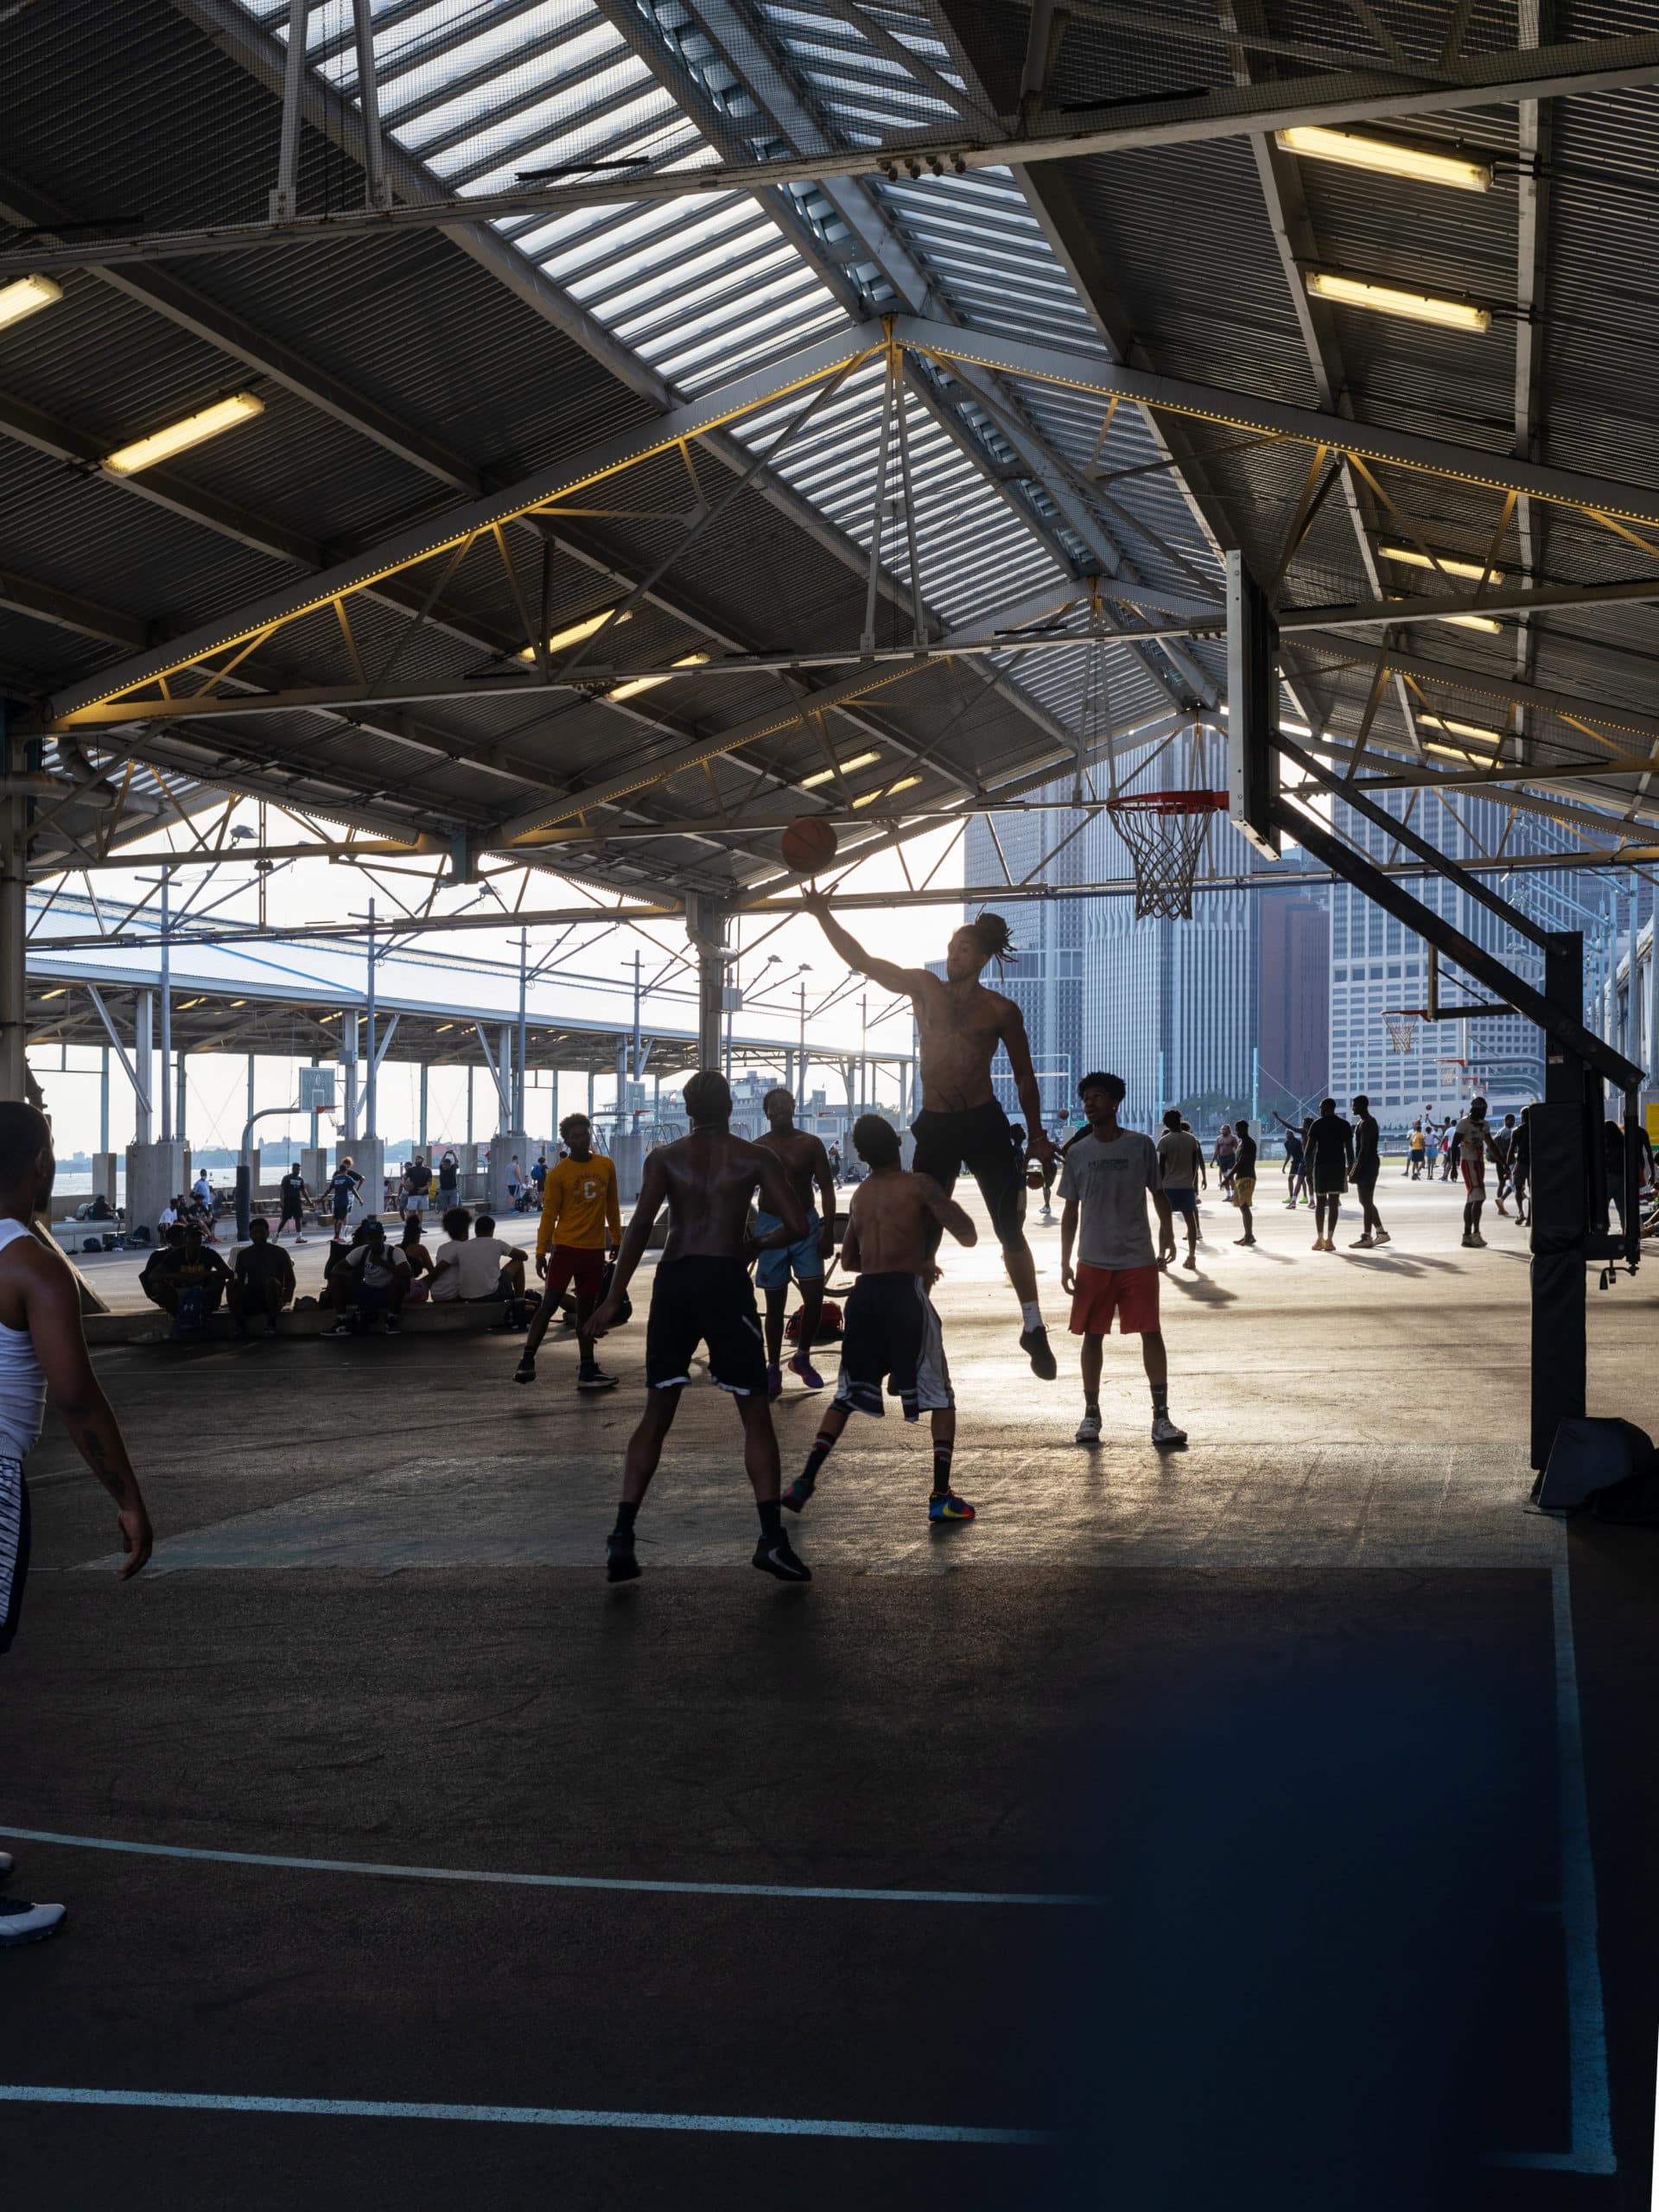 Man jumping with basketball during a game under the canopy at Pier 2. Other basketball games are being played in the background.